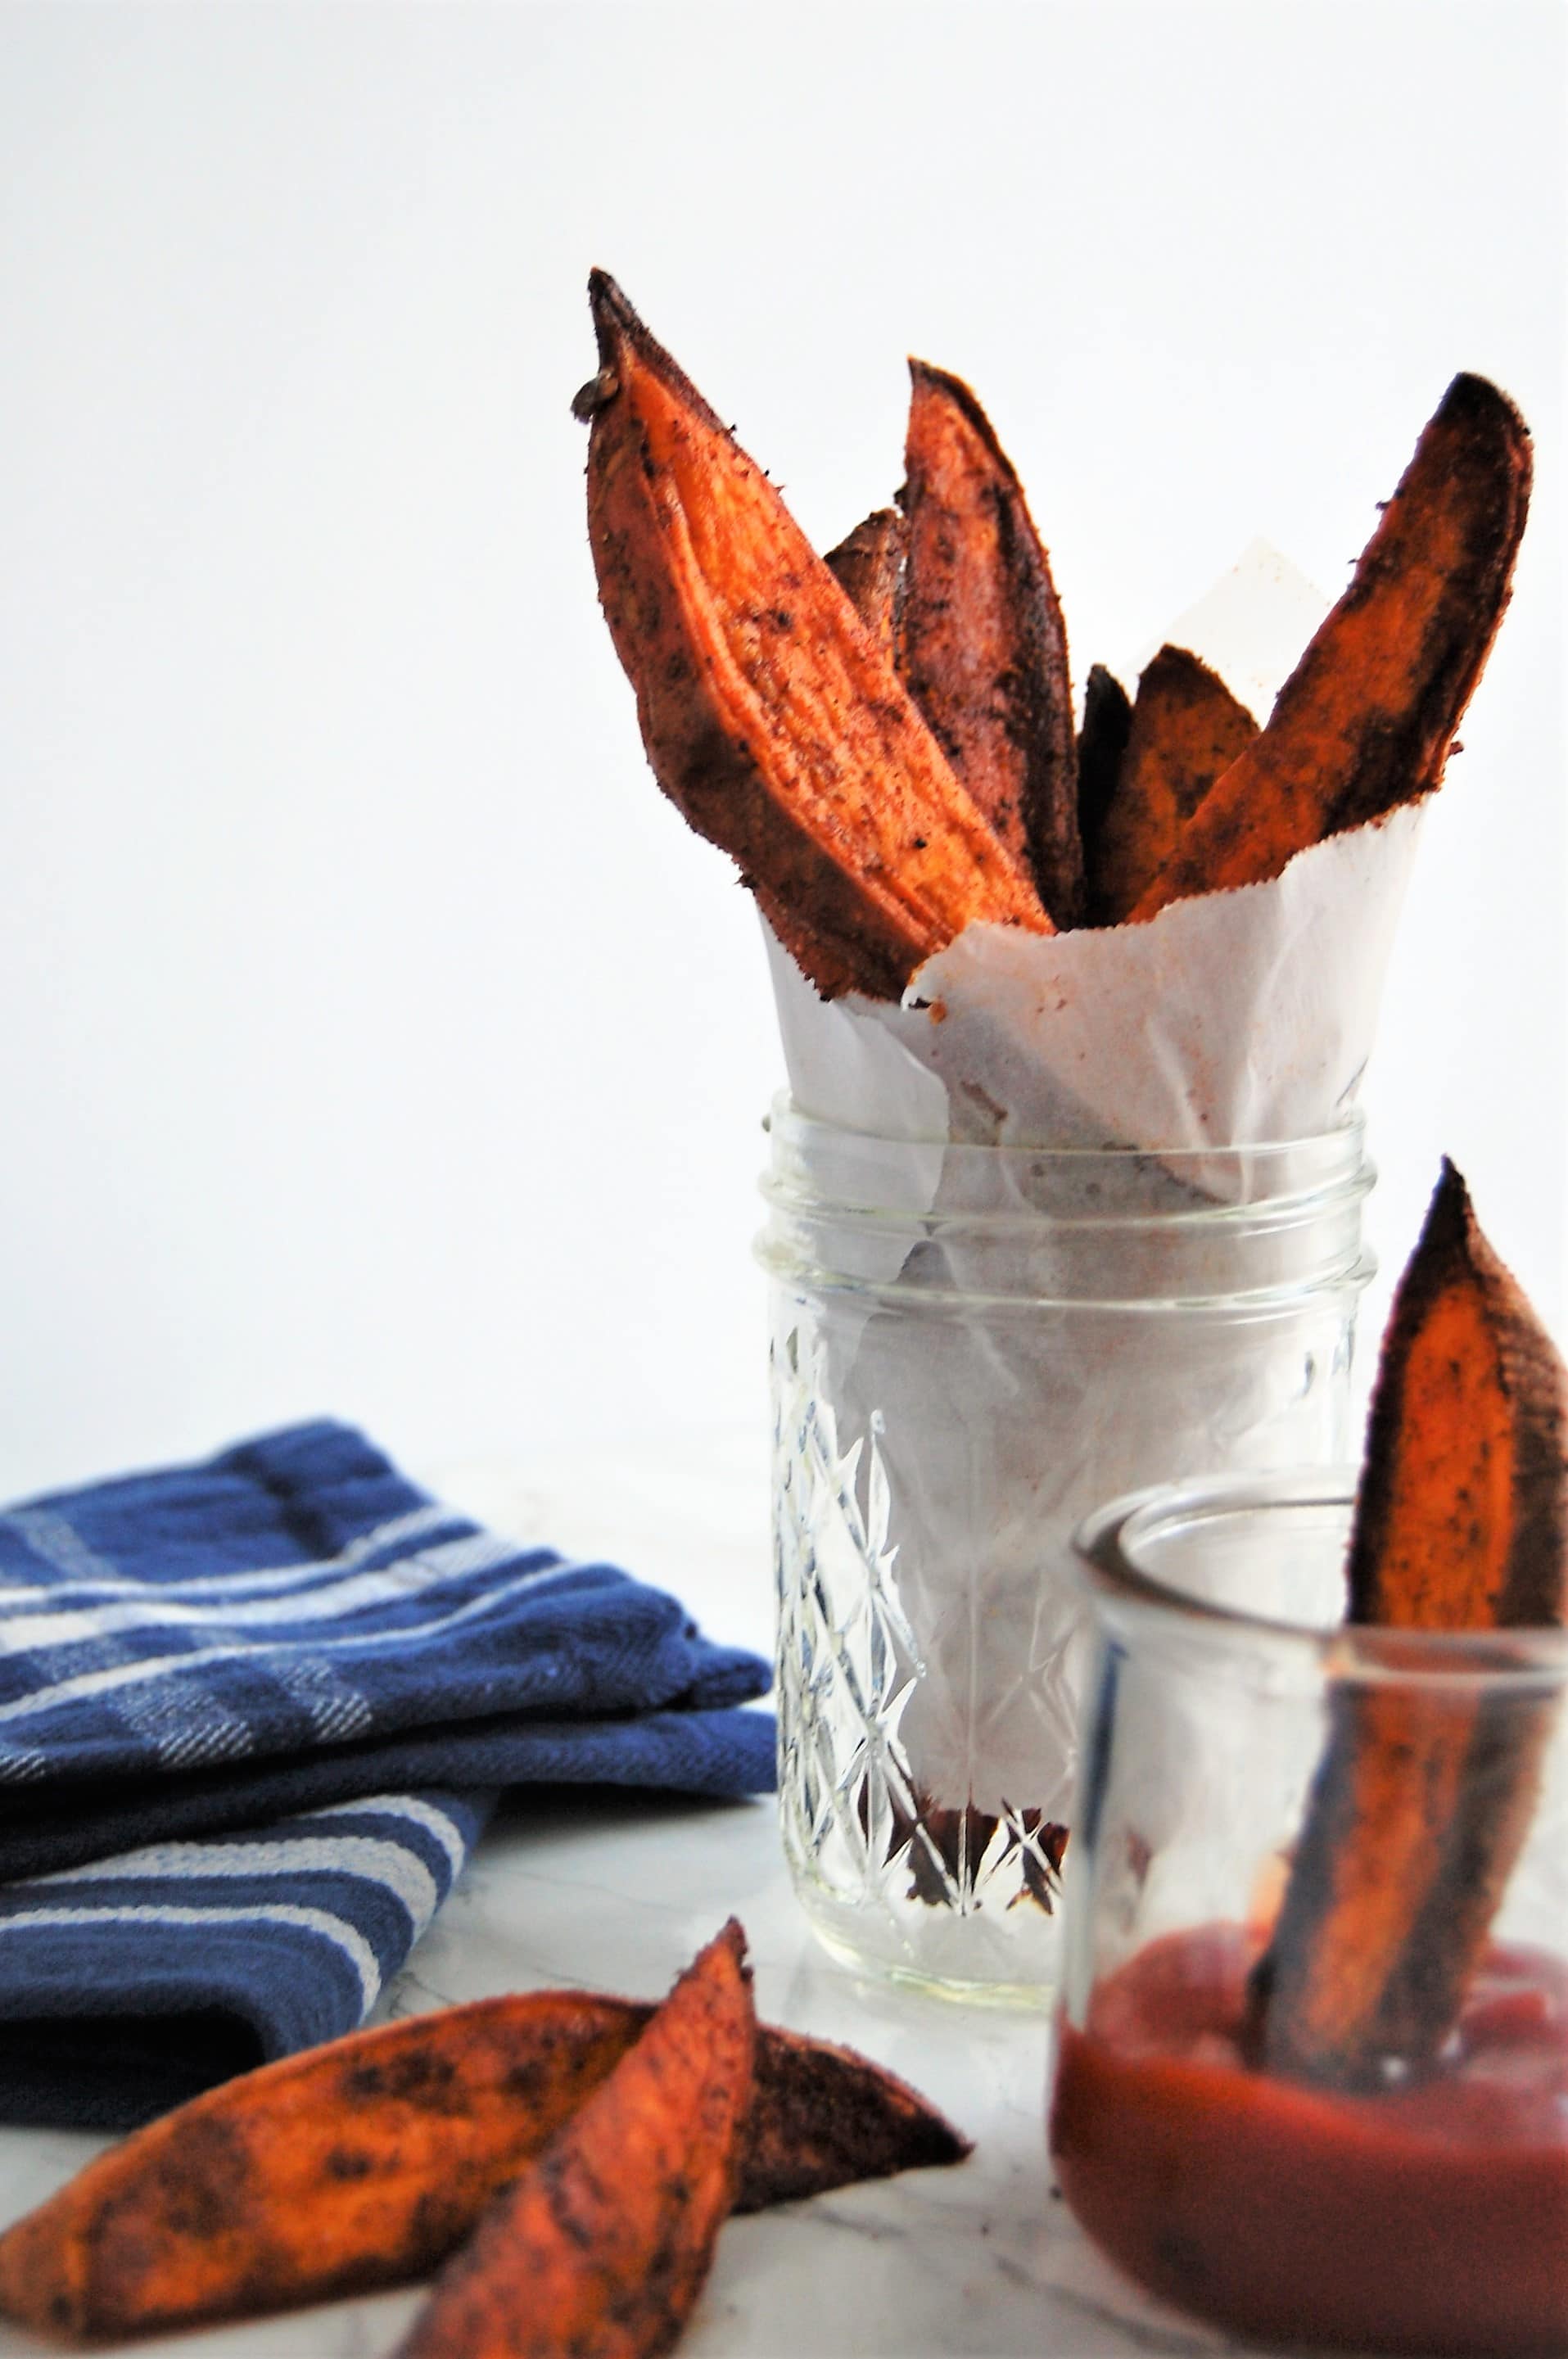 Baked Spiced Sweet Potato Wedges are a super flavorful side thanks to the best sweet potato spice blend! They're a versatile side dish and free of the top 8 most common food allergens.